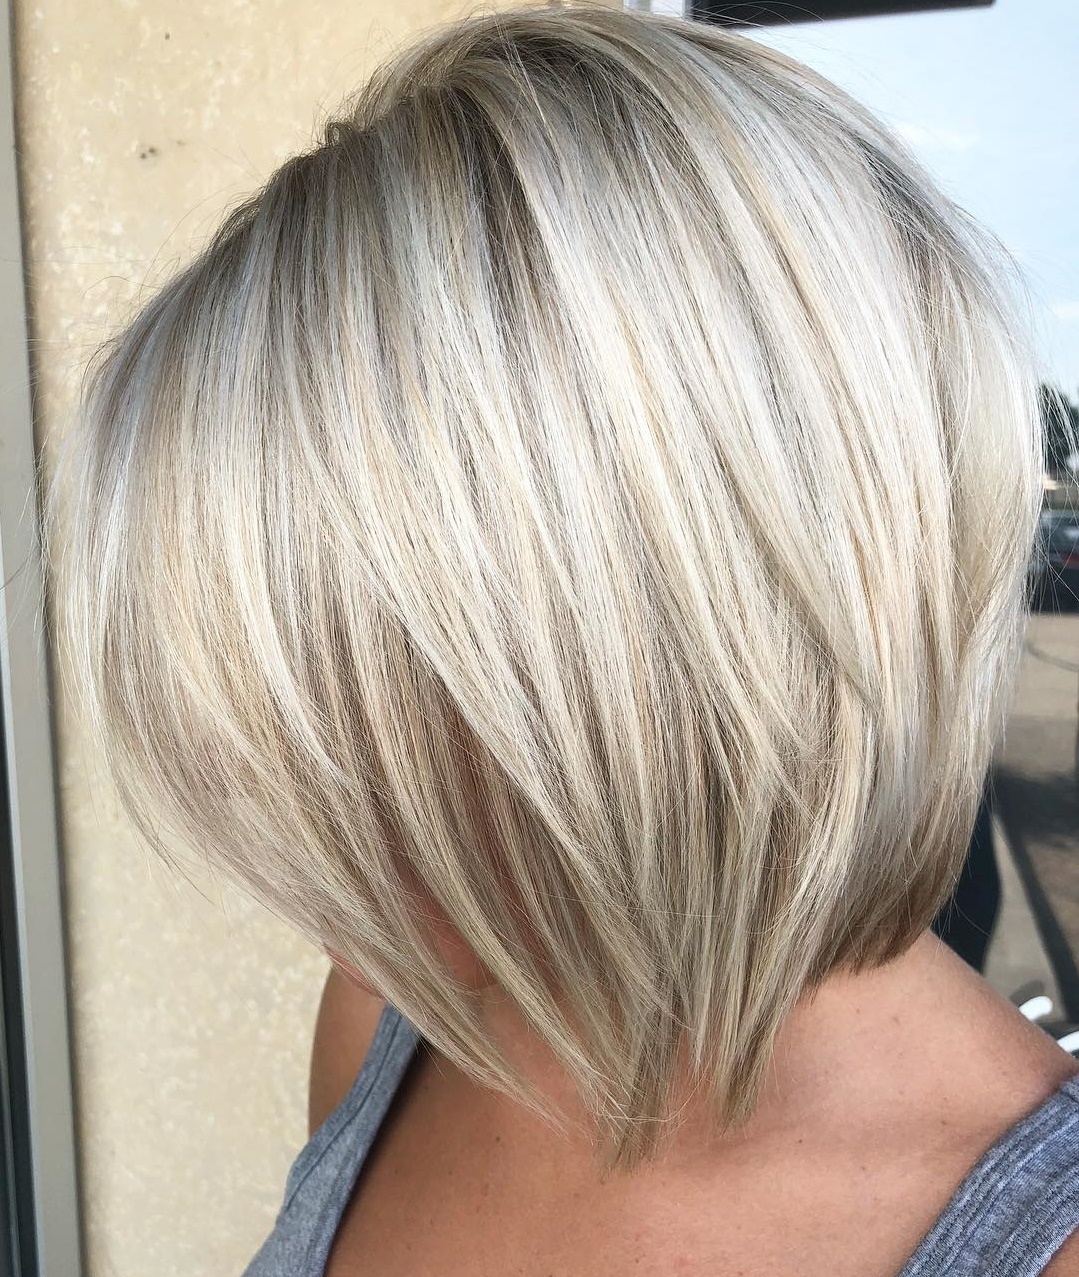 45 Short Hairstyles For Fine Hair To Rock In 2019 regarding Gray Hair Cuts For Thin Hair